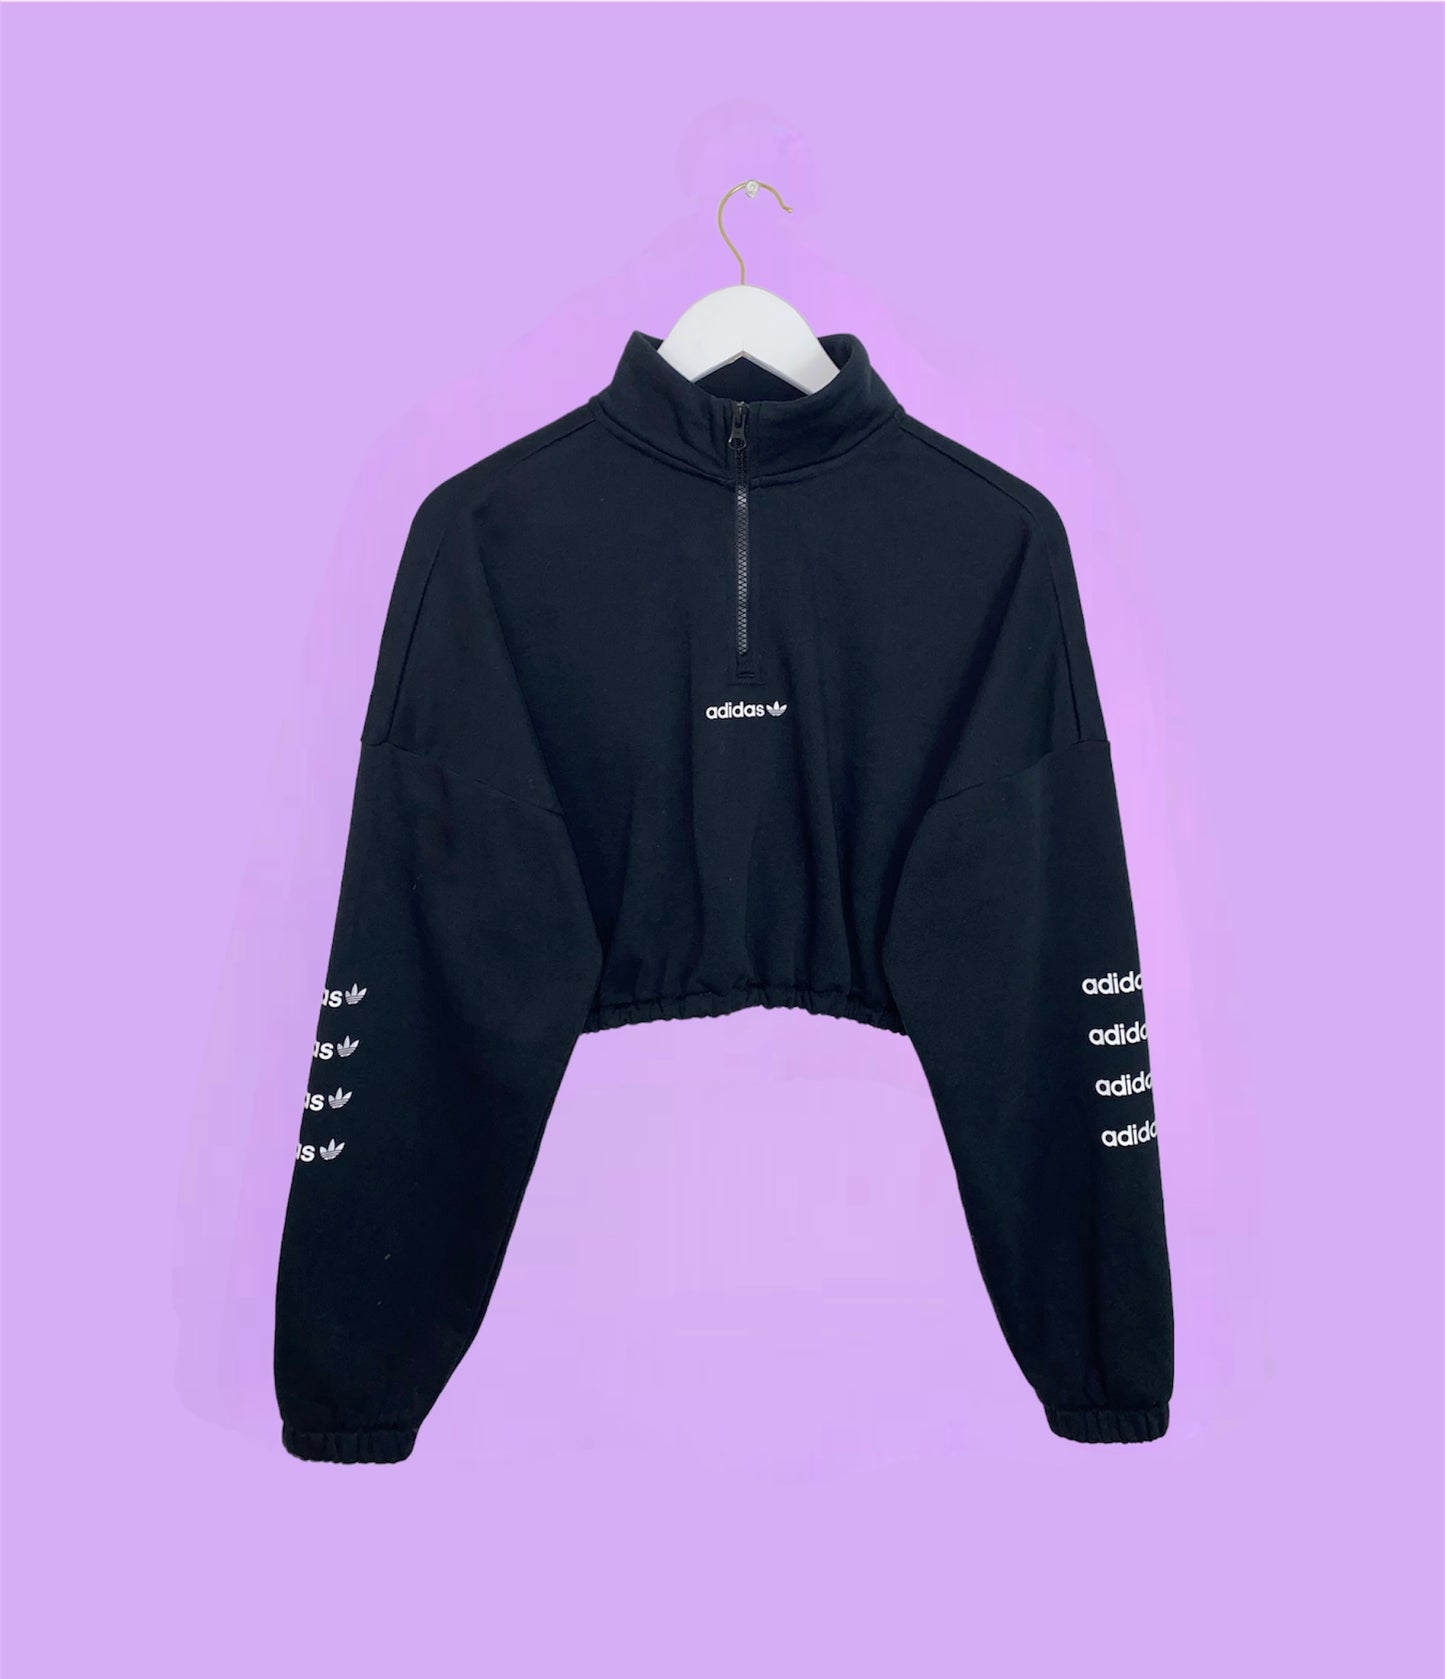 black 1/4 zip cropped sweatshirt with white adidas logo on front and sleeves shown on a lilac background